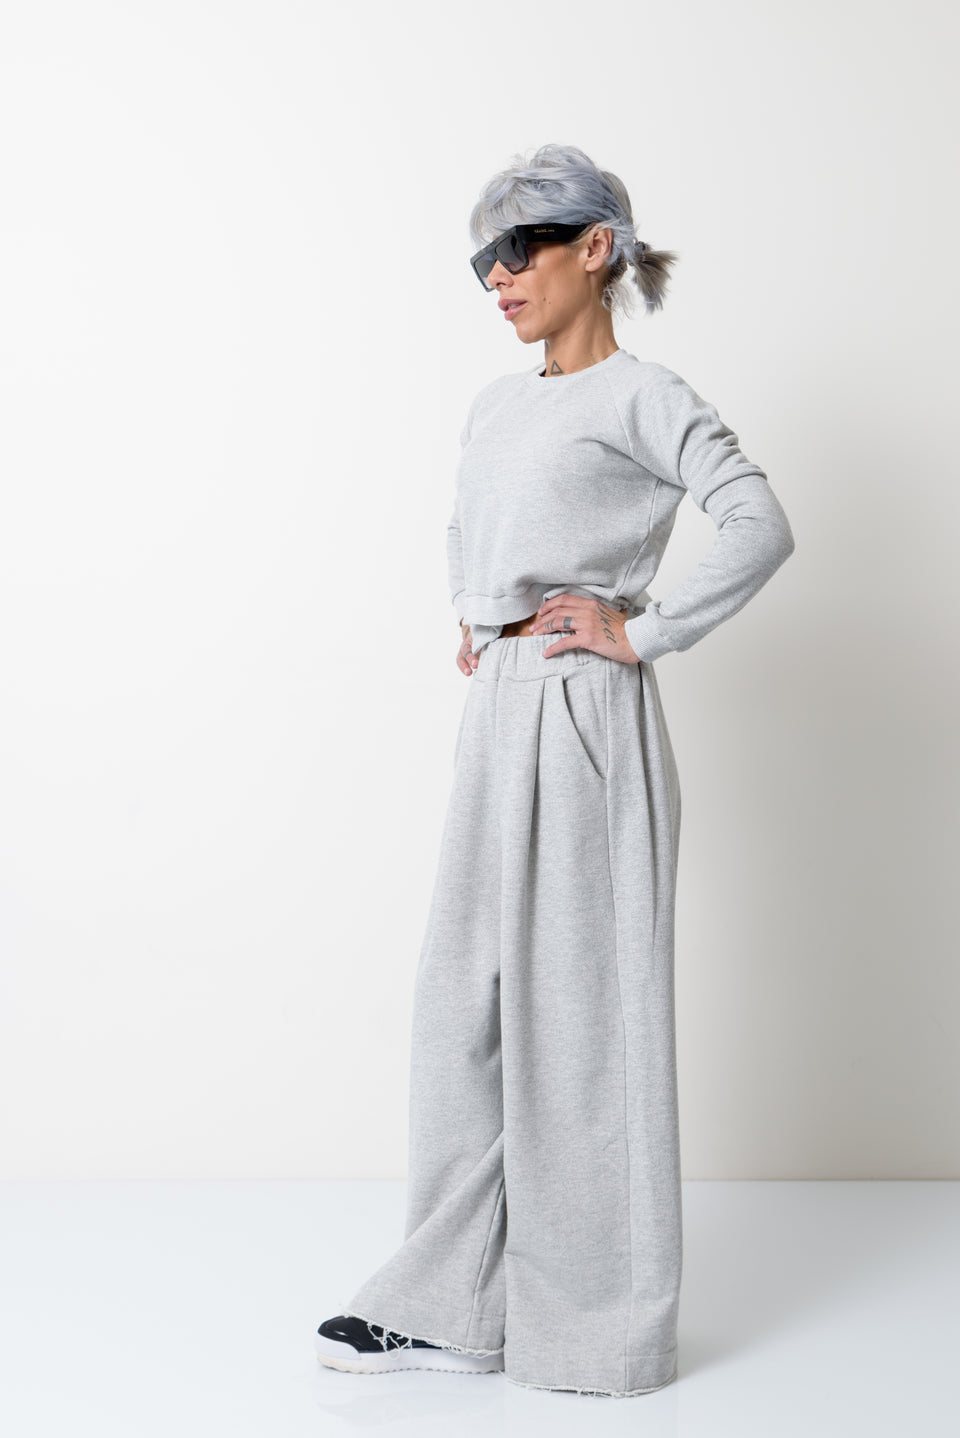 Grey Two Piece Tracksuit Set For Women - Clothes By Locker Room